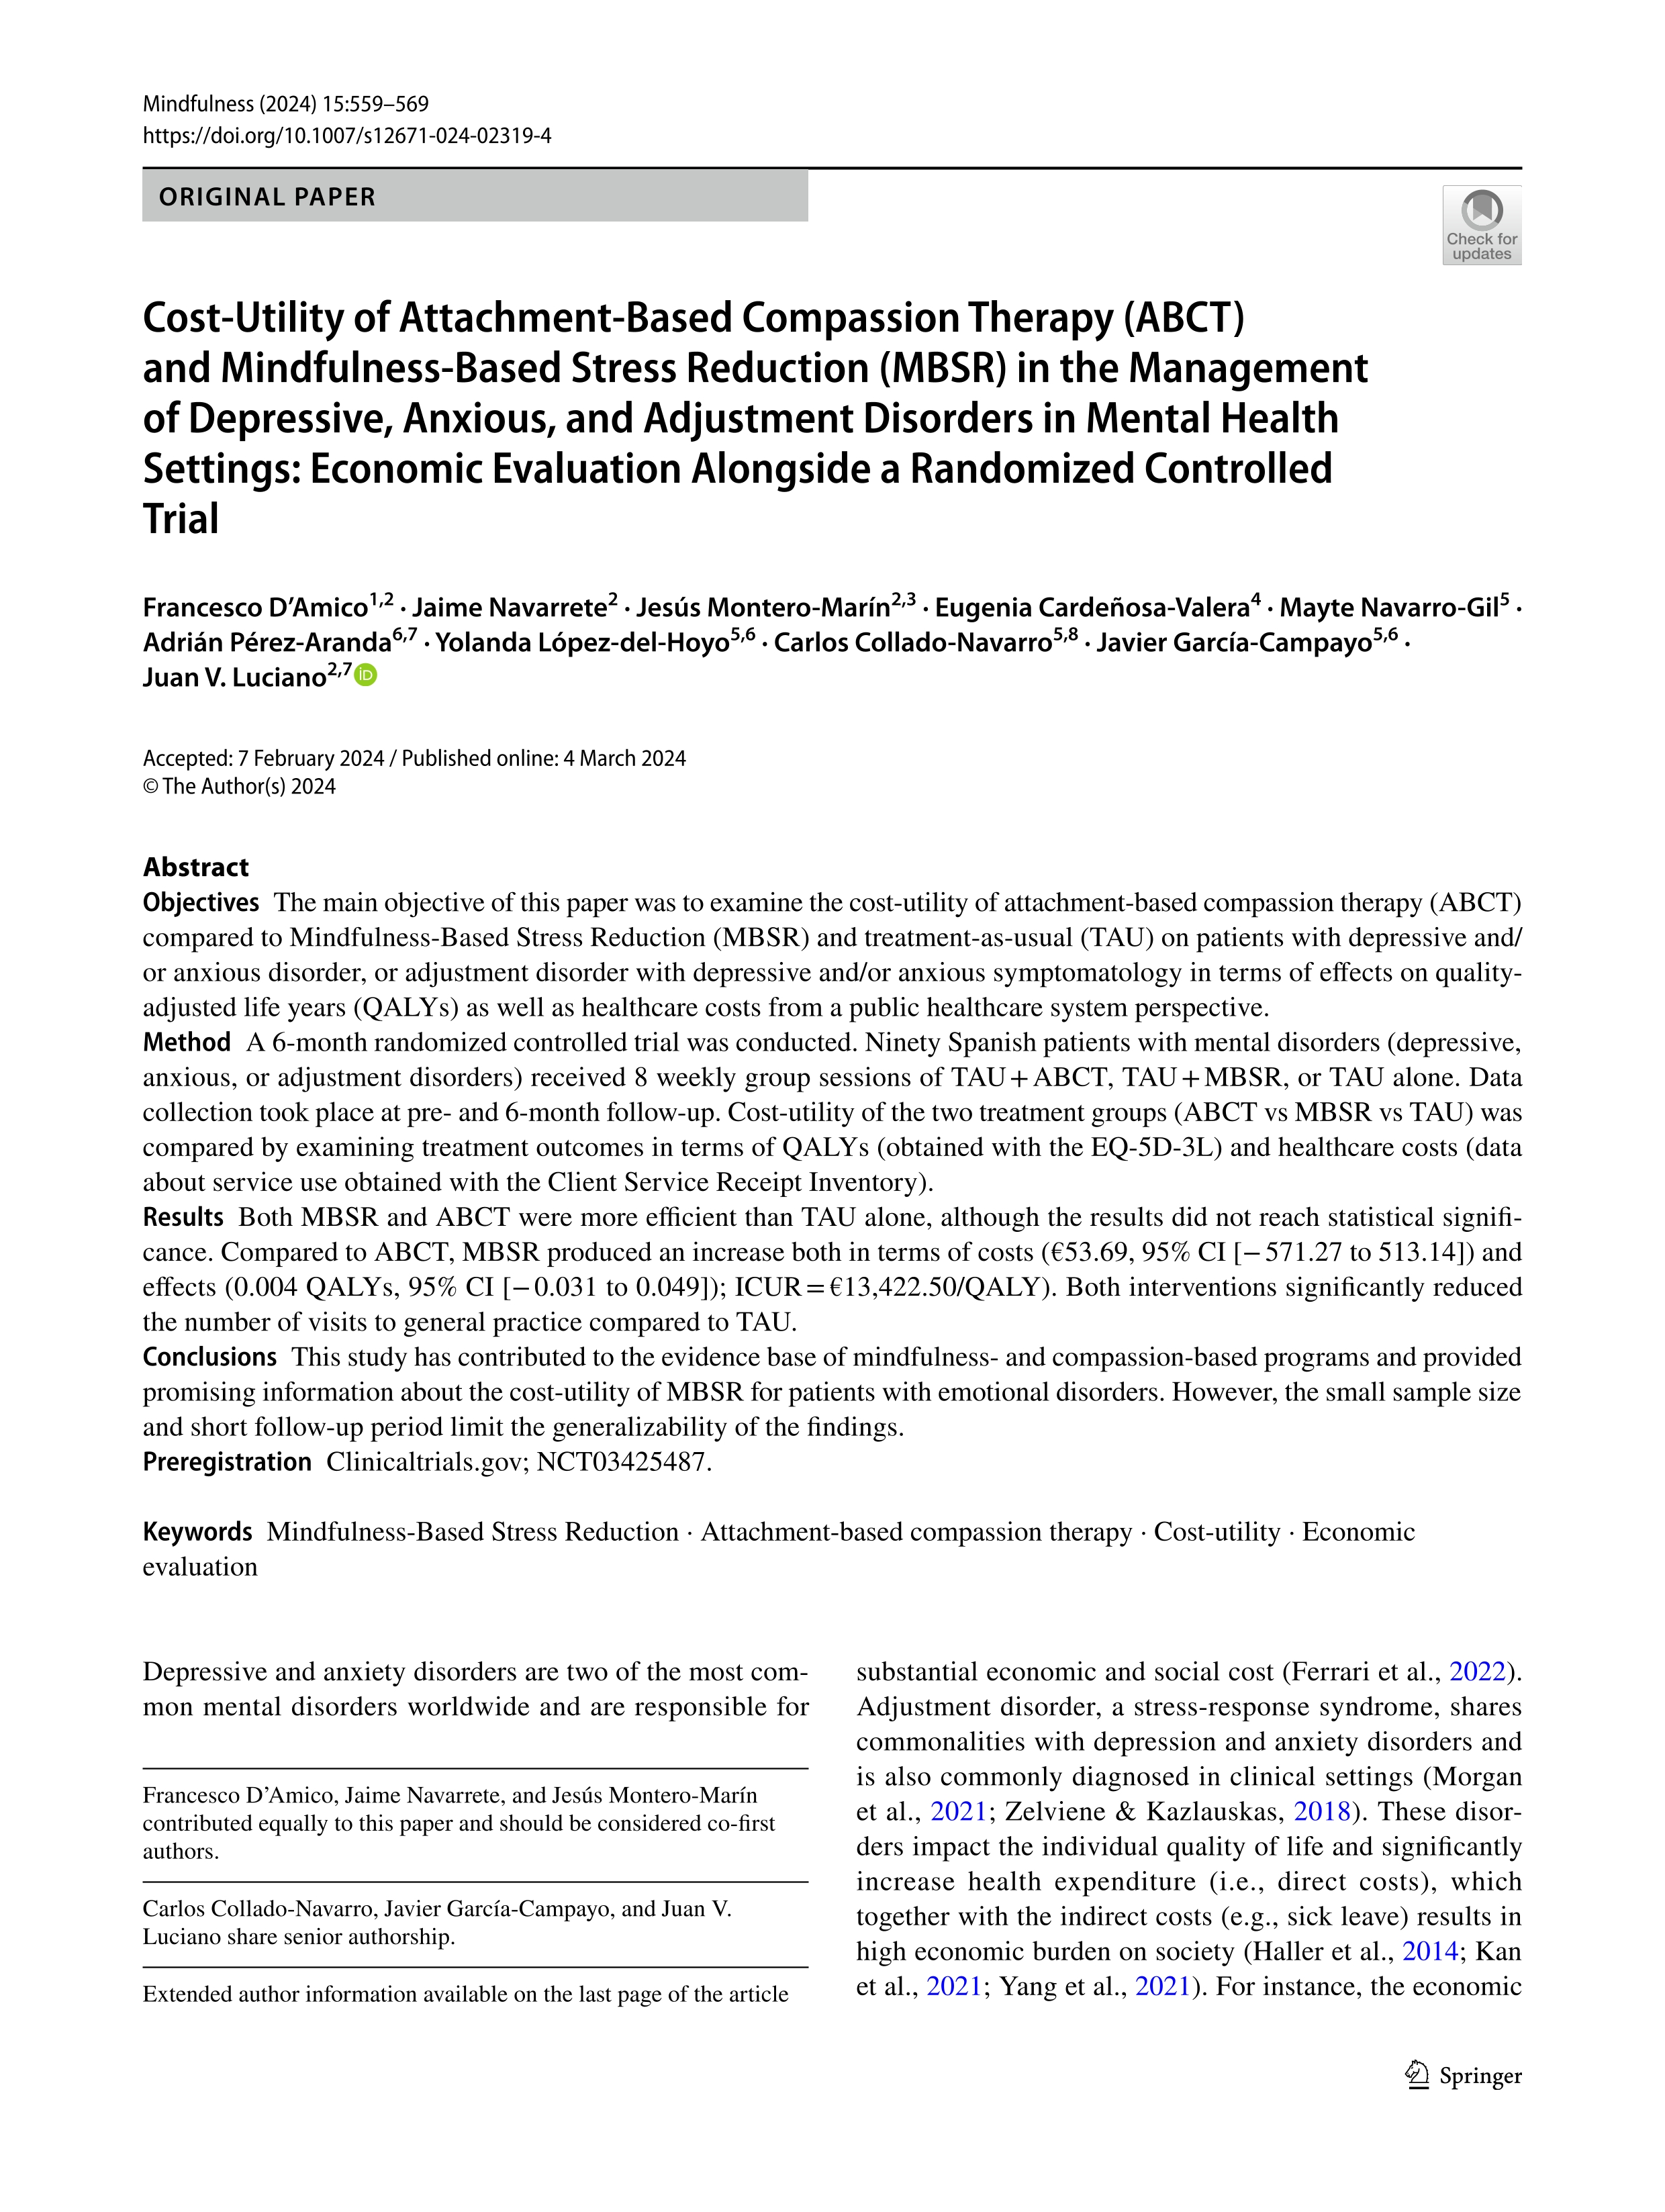 Cost-Utility of Attachment-Based Compassion Therapy (ABCT) and Mindfulness-Based Stress Reduction (MBSR) in the Management of Depressive, Anxious, and Adjustment Disorders in Mental Health Settings: Economic Evaluation Alongside a Randomized Controlled Trial